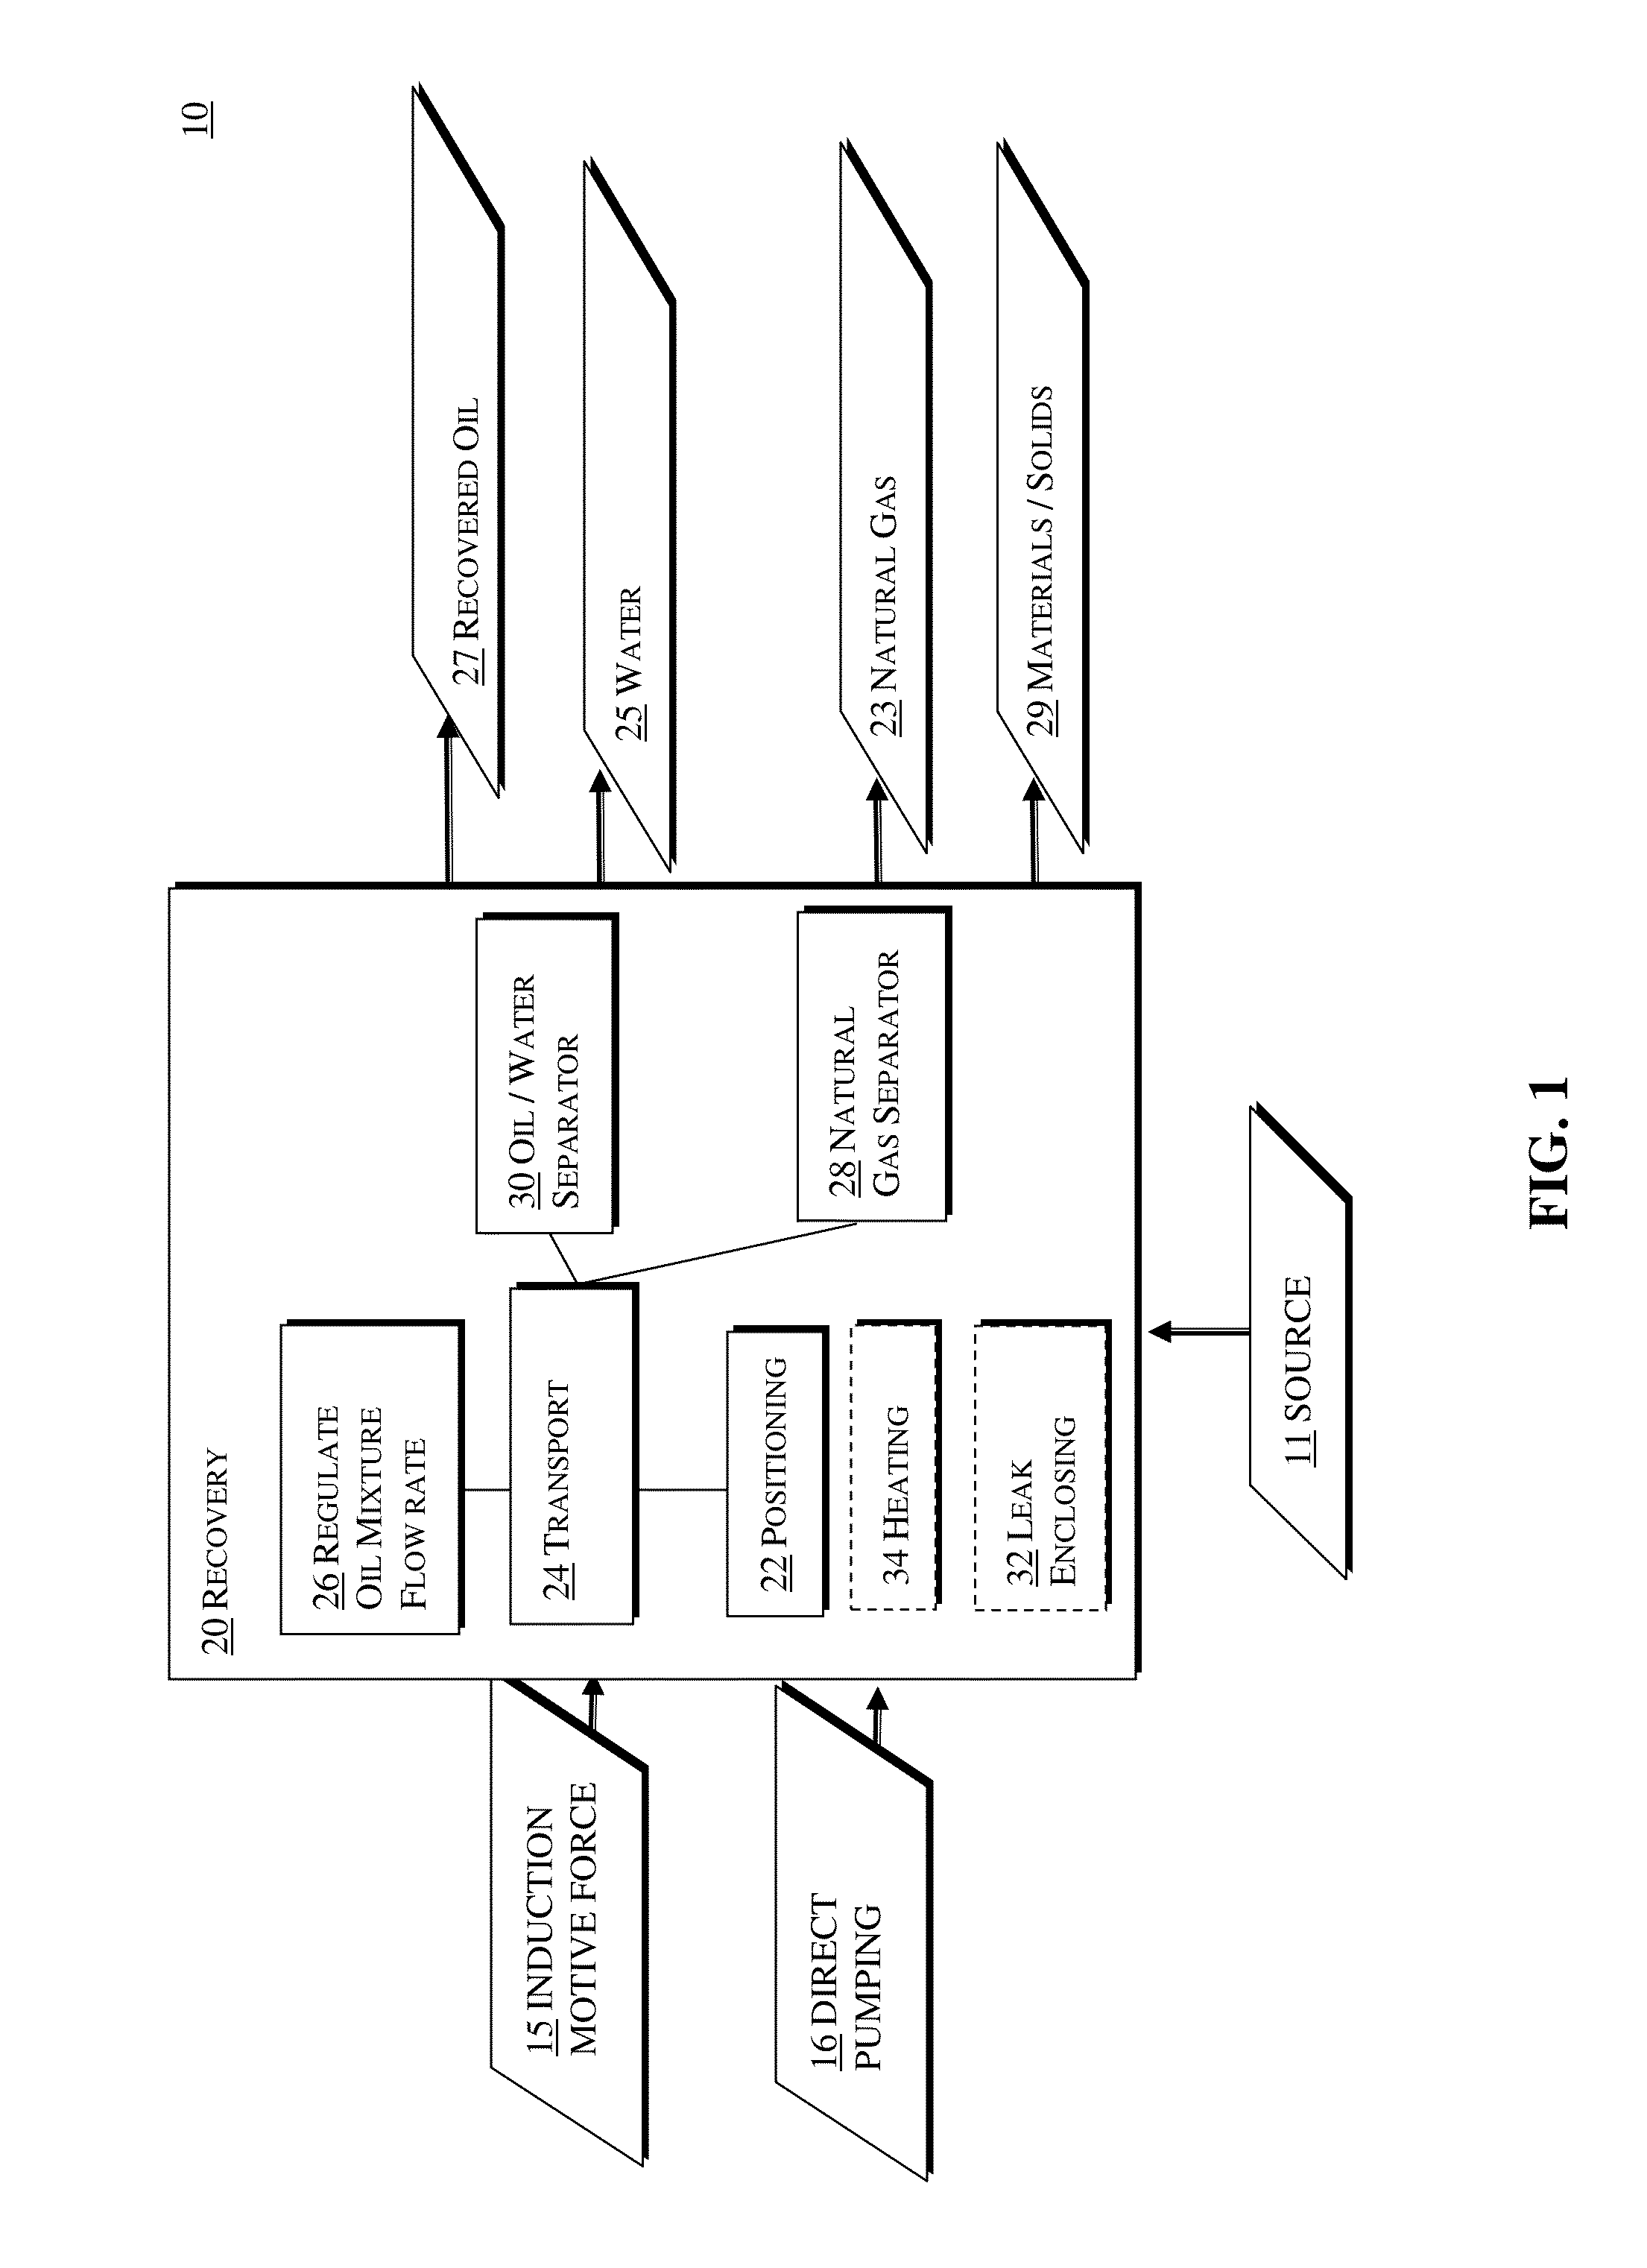 Method and device for underwater recovery of products or pollutants